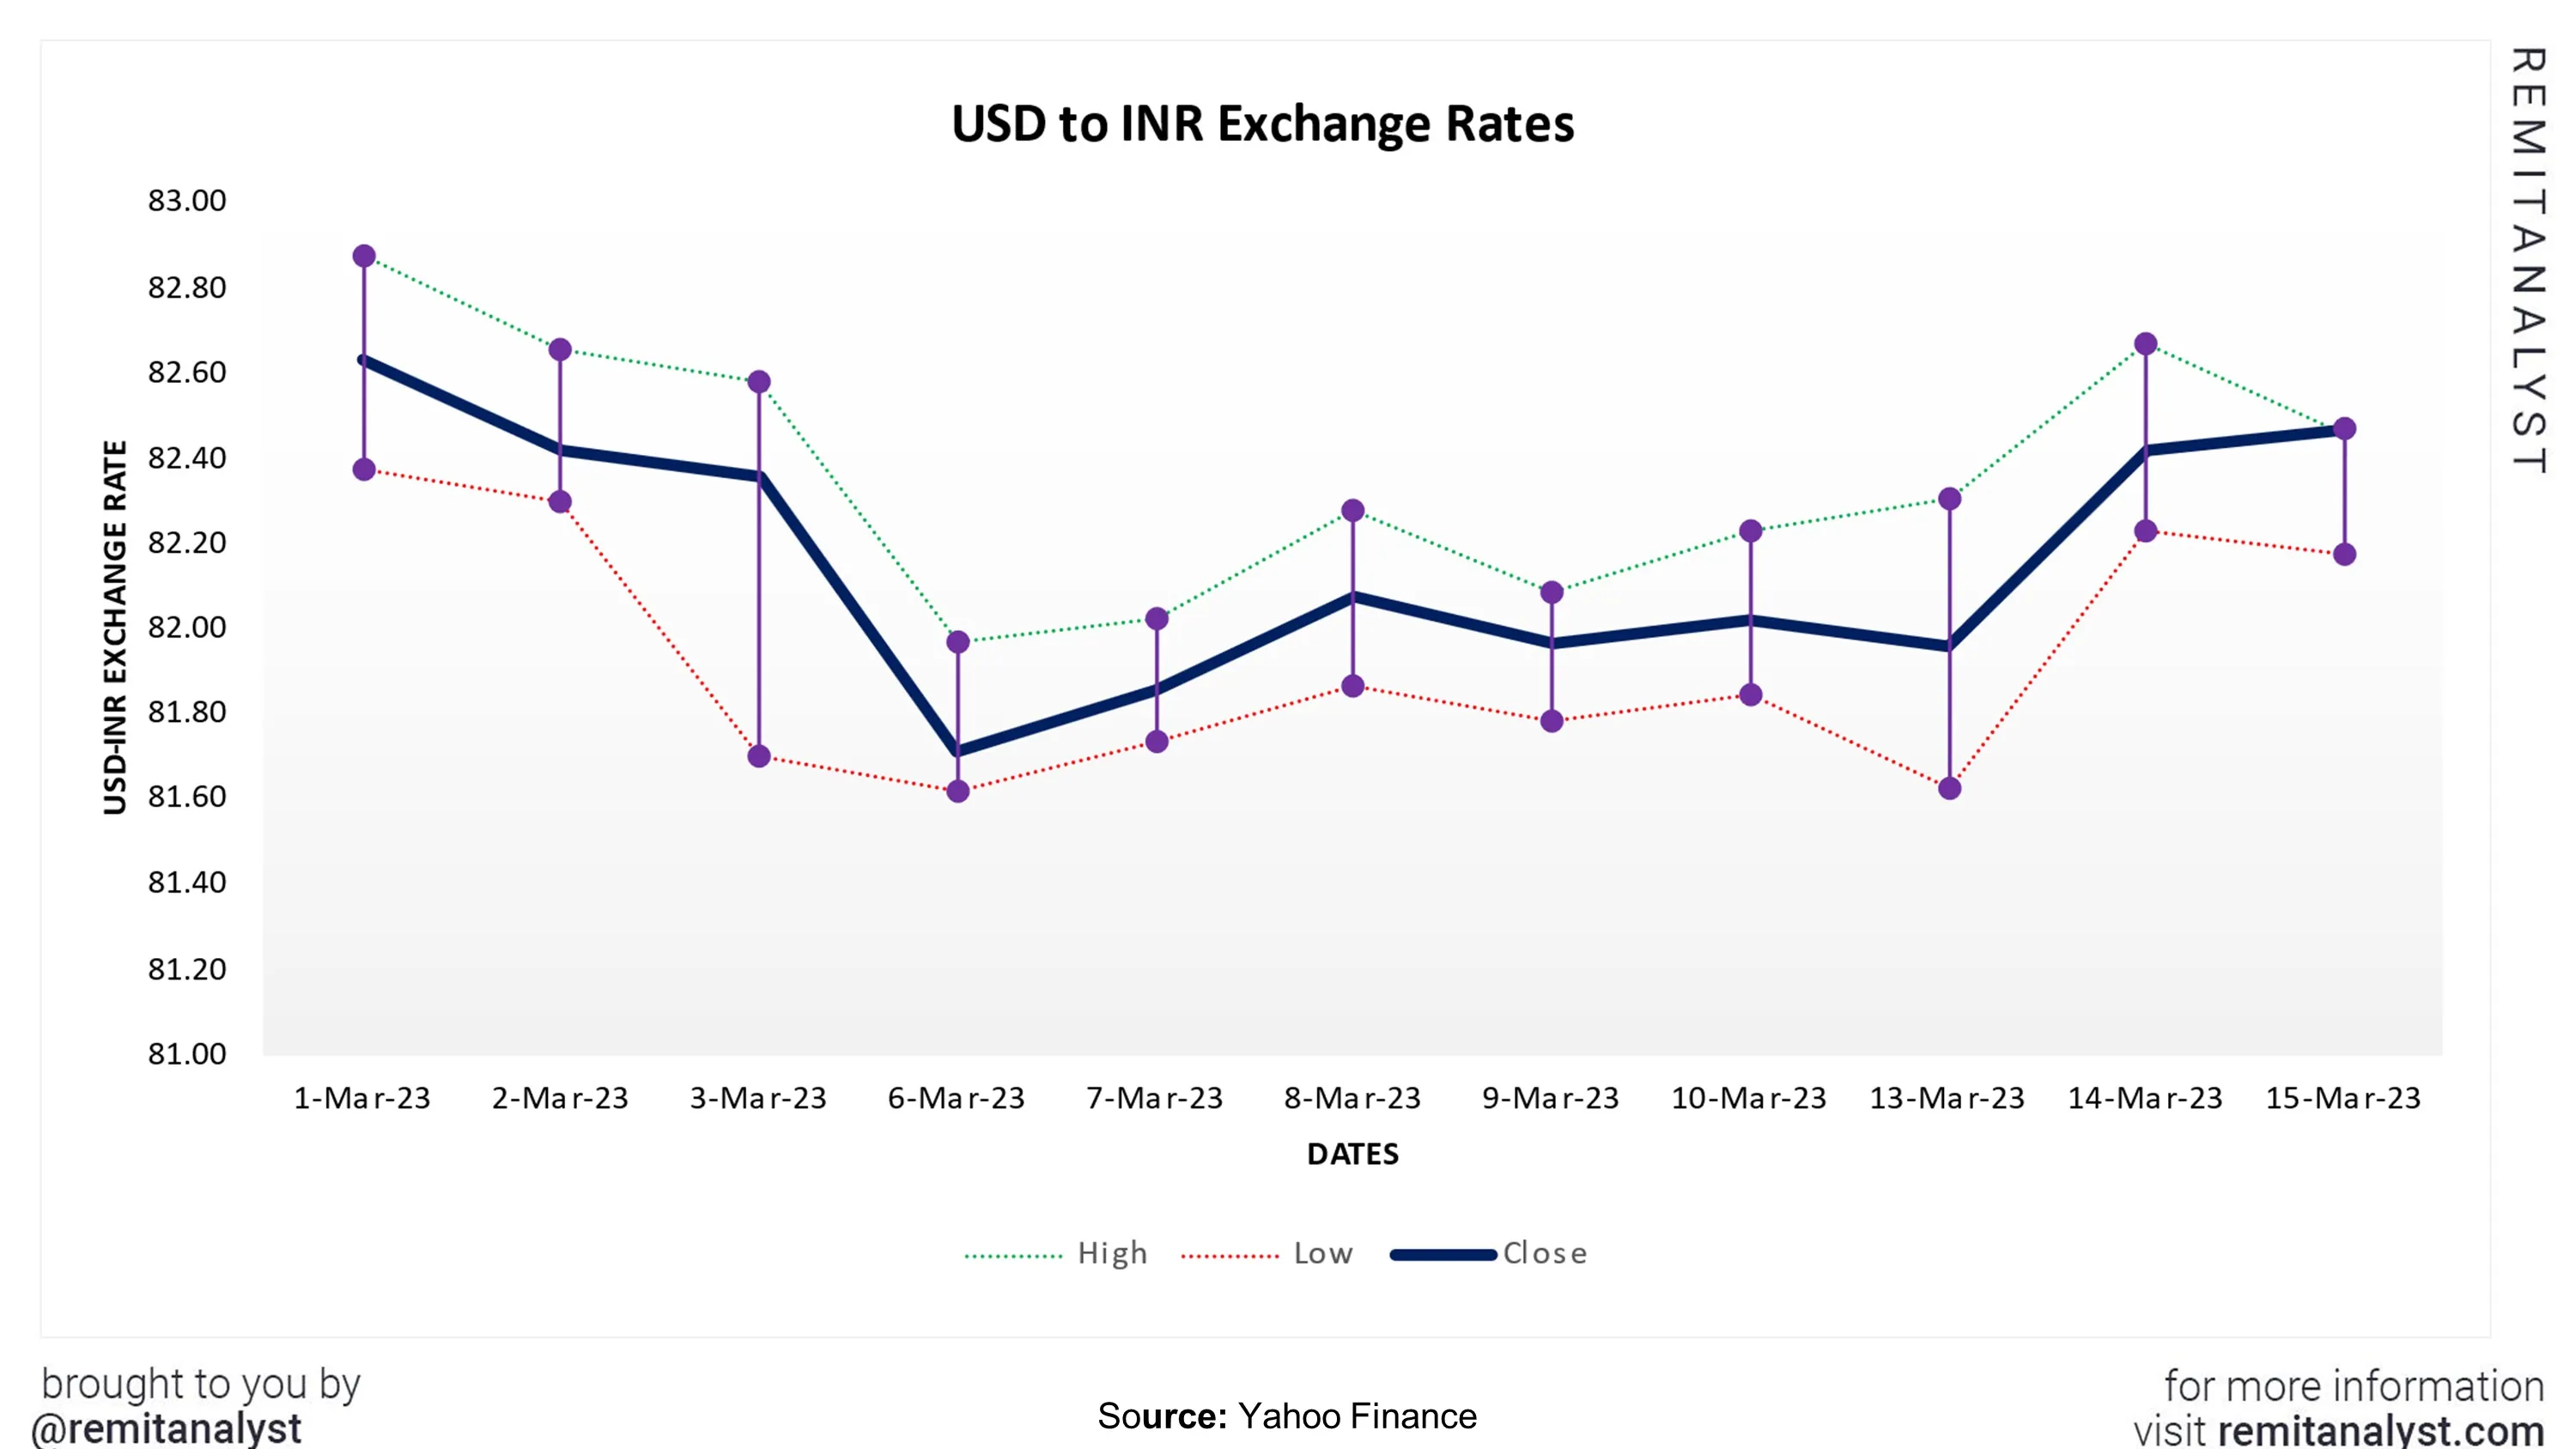 usd-to-inr-exchange-rate-from-1-mar-2023-to-15-mar-2023